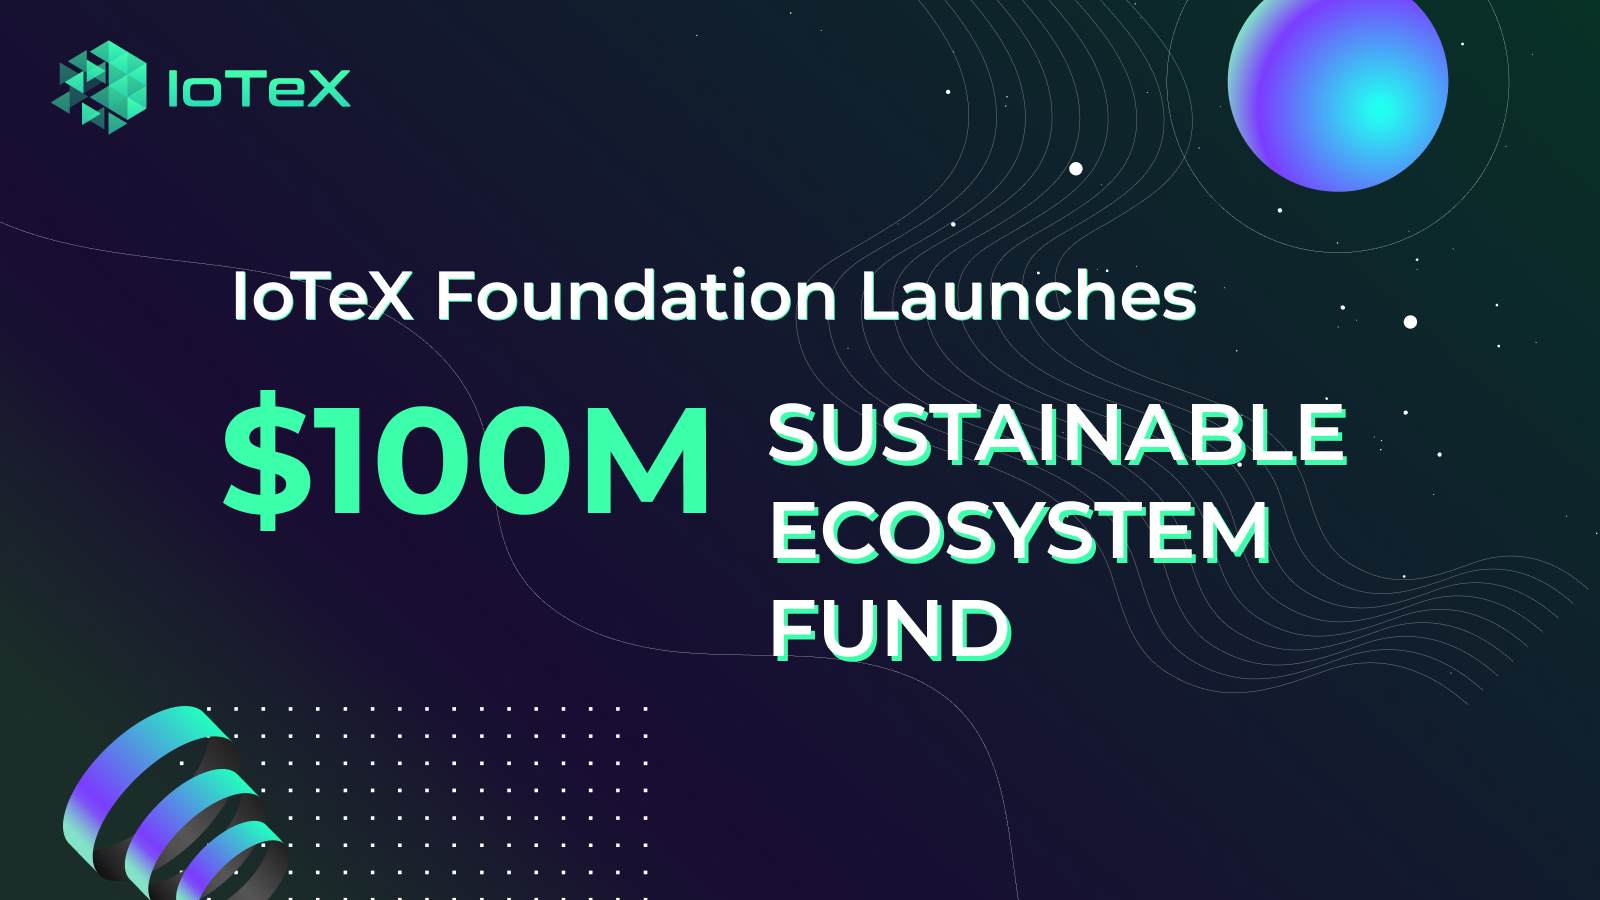 IoTeX Foundation Launches $100M Sustainable Ecosystem Fund